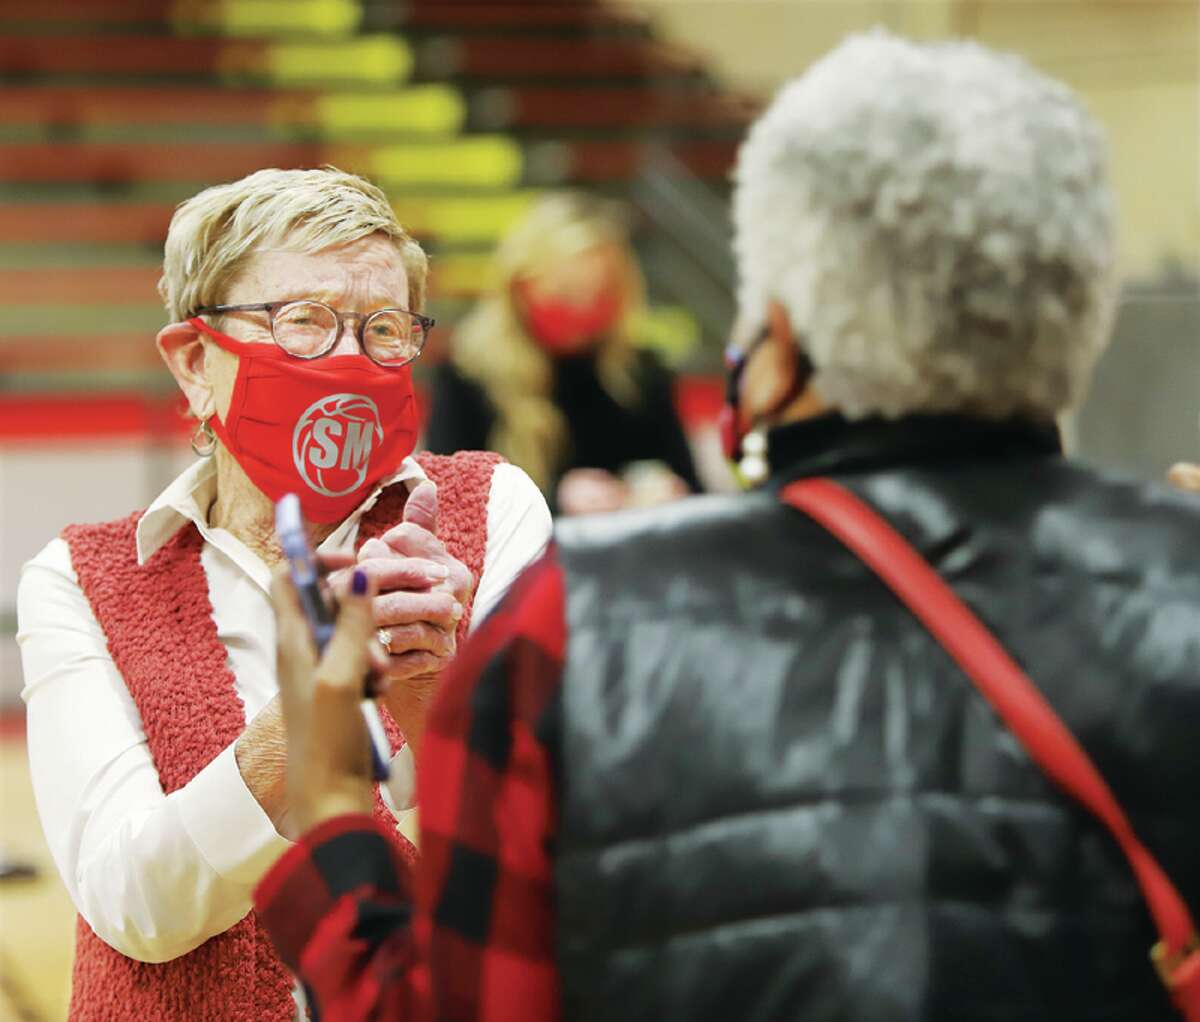 Millicent McAfoos, widow of the late Stan McAfoos, was emotional on Jan. 21 as she greeted old friends at the dedication ceremony to re-name the gym at West Elementary in honor of the legendary basketball coach.